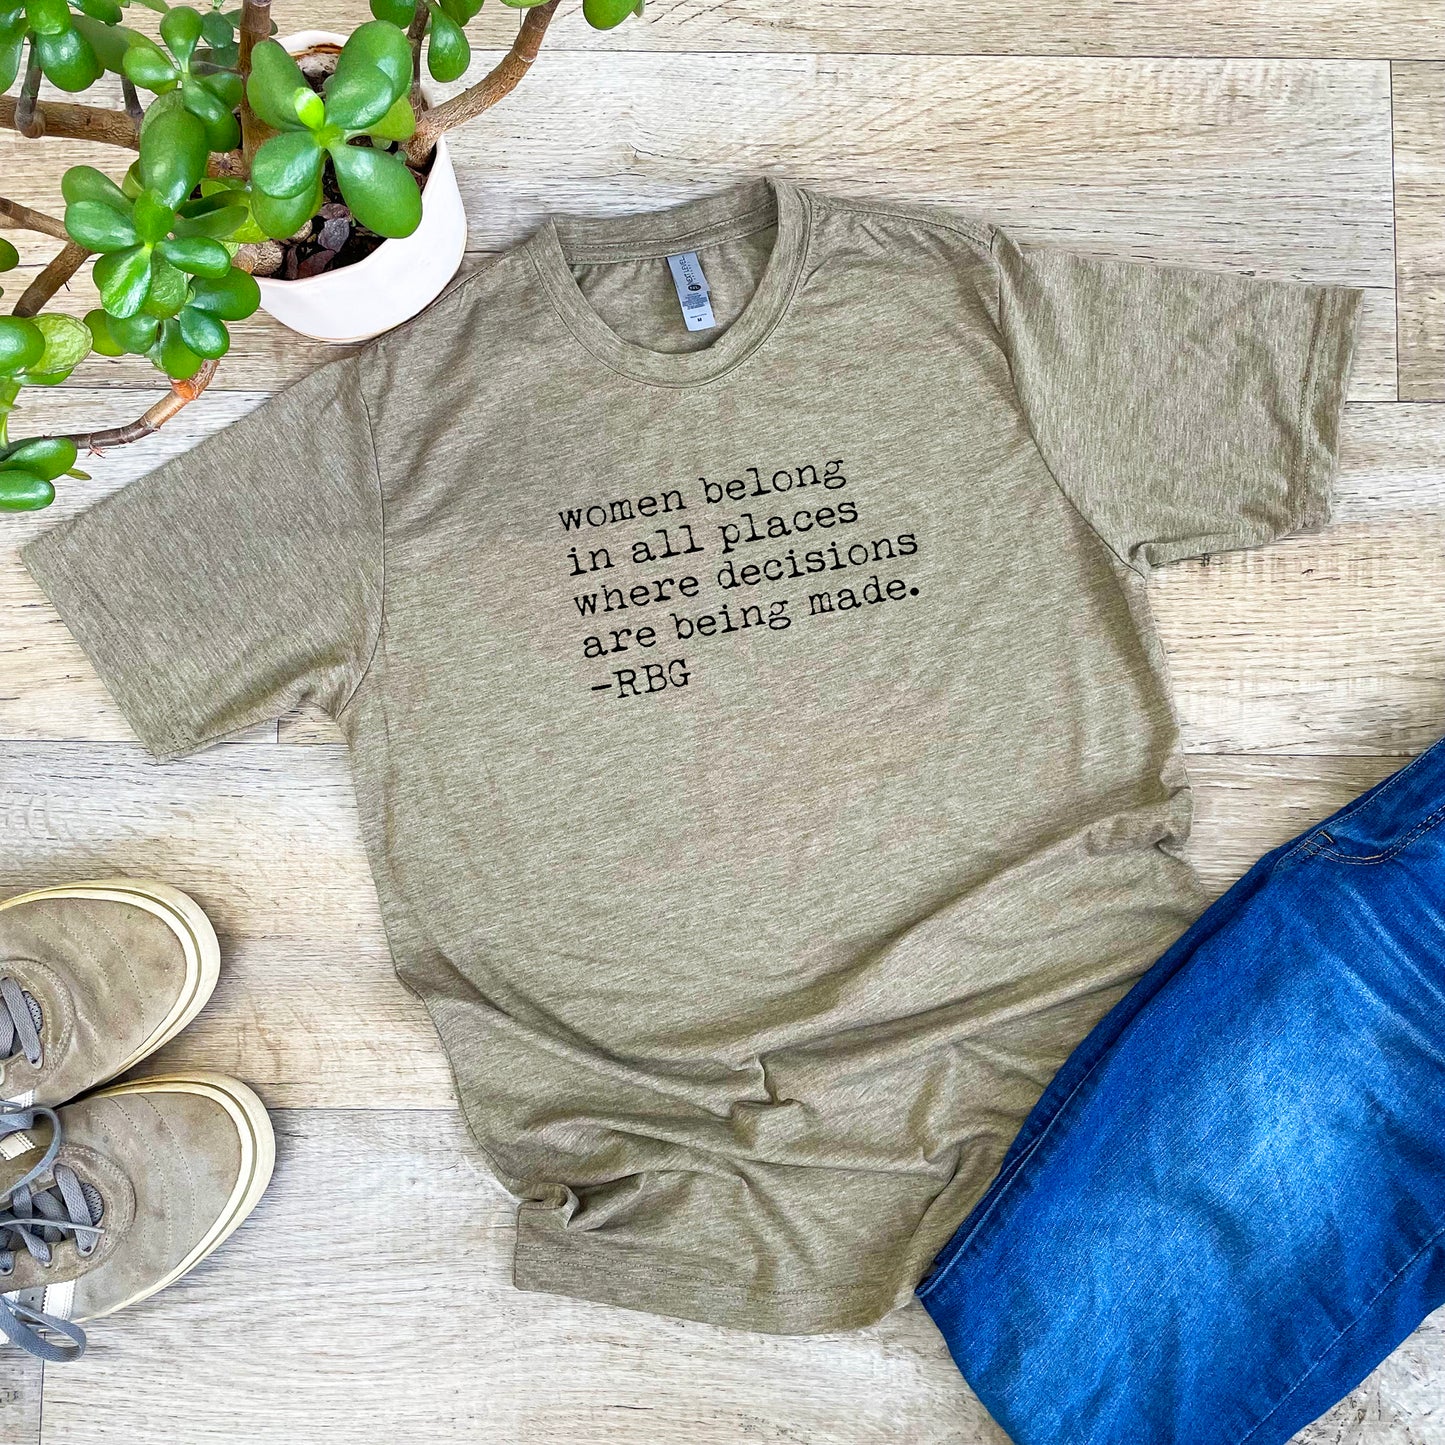 Women Belong In All Places Where Decisions Are Being Made - RBG - Men's / Unisex Tee - Stonewash Blue or Sage